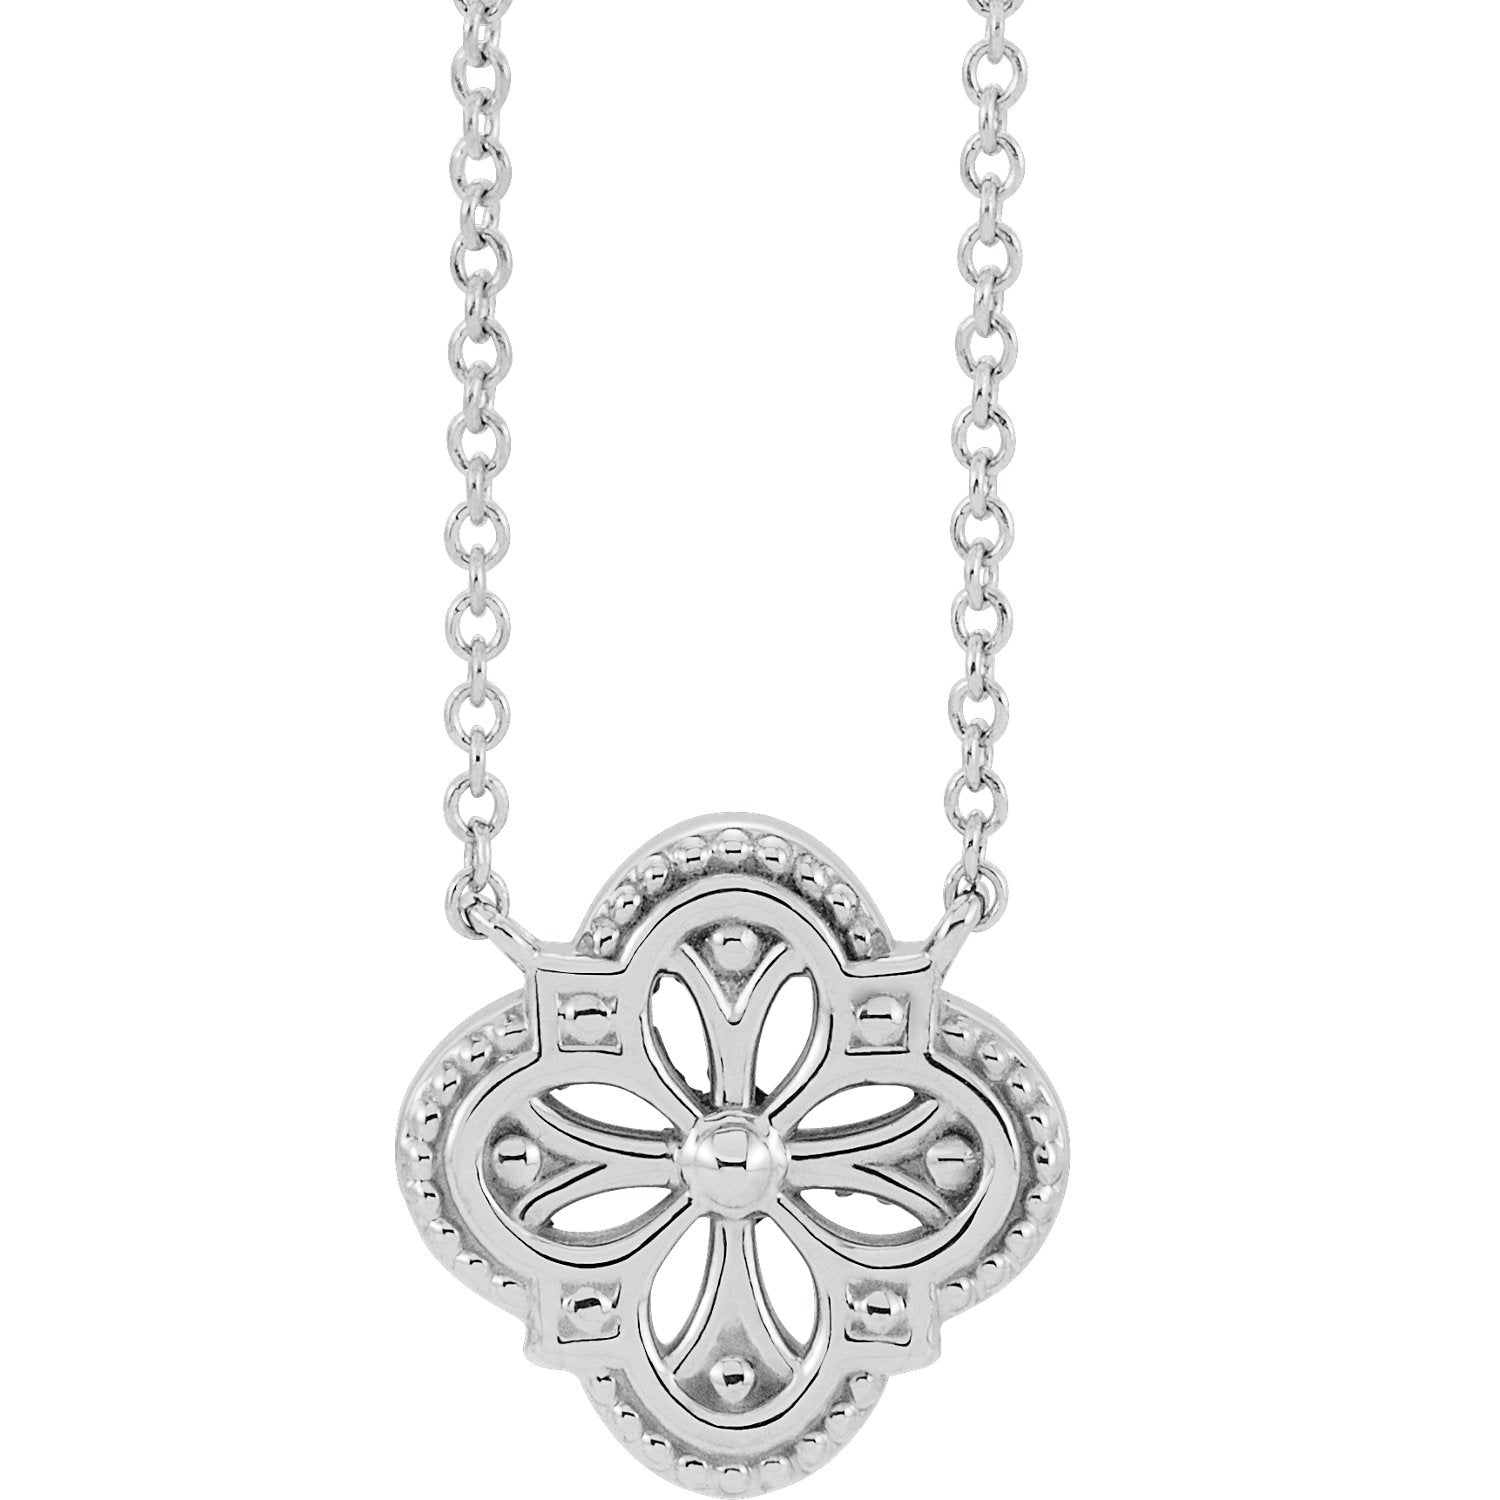 14KT White Gold Vintage-Inspired Clover Necklace, 14KT White Gold Vintage-Inspired Clover Necklace - Legacy Saint Jewelry